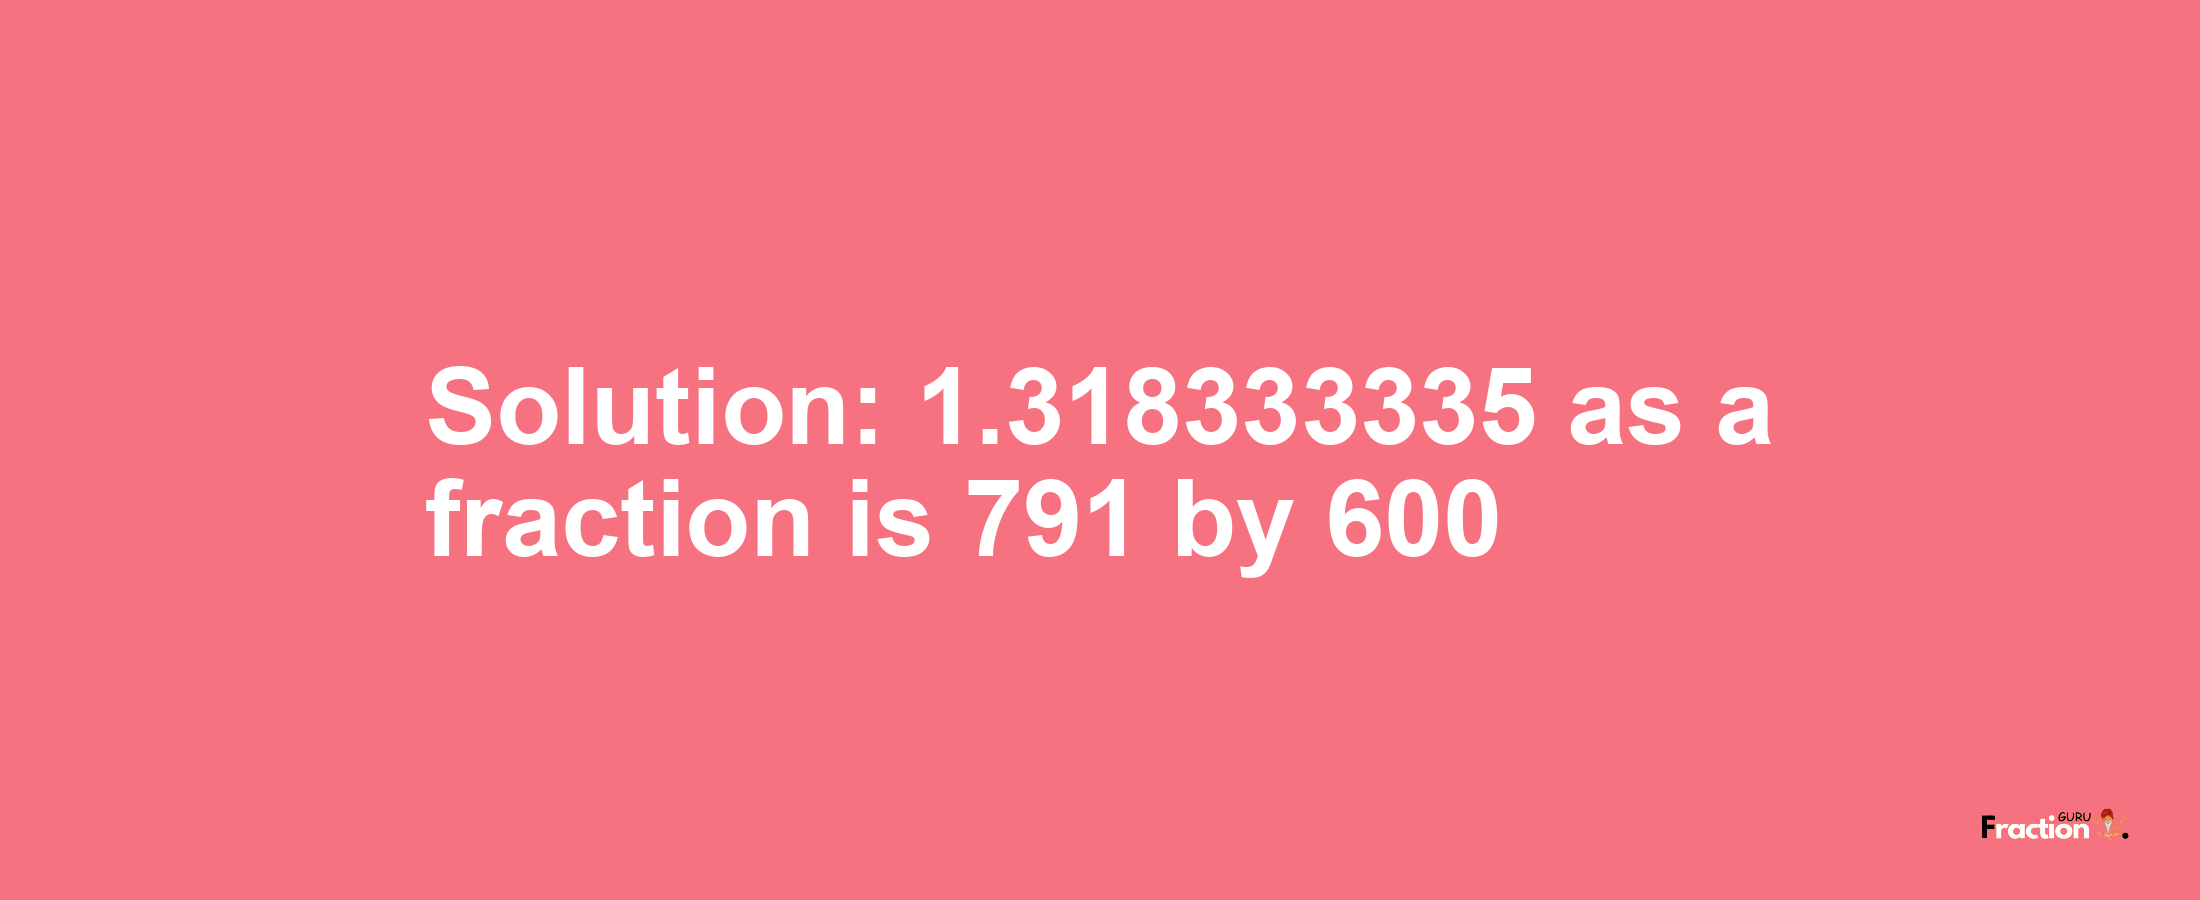 Solution:1.318333335 as a fraction is 791/600